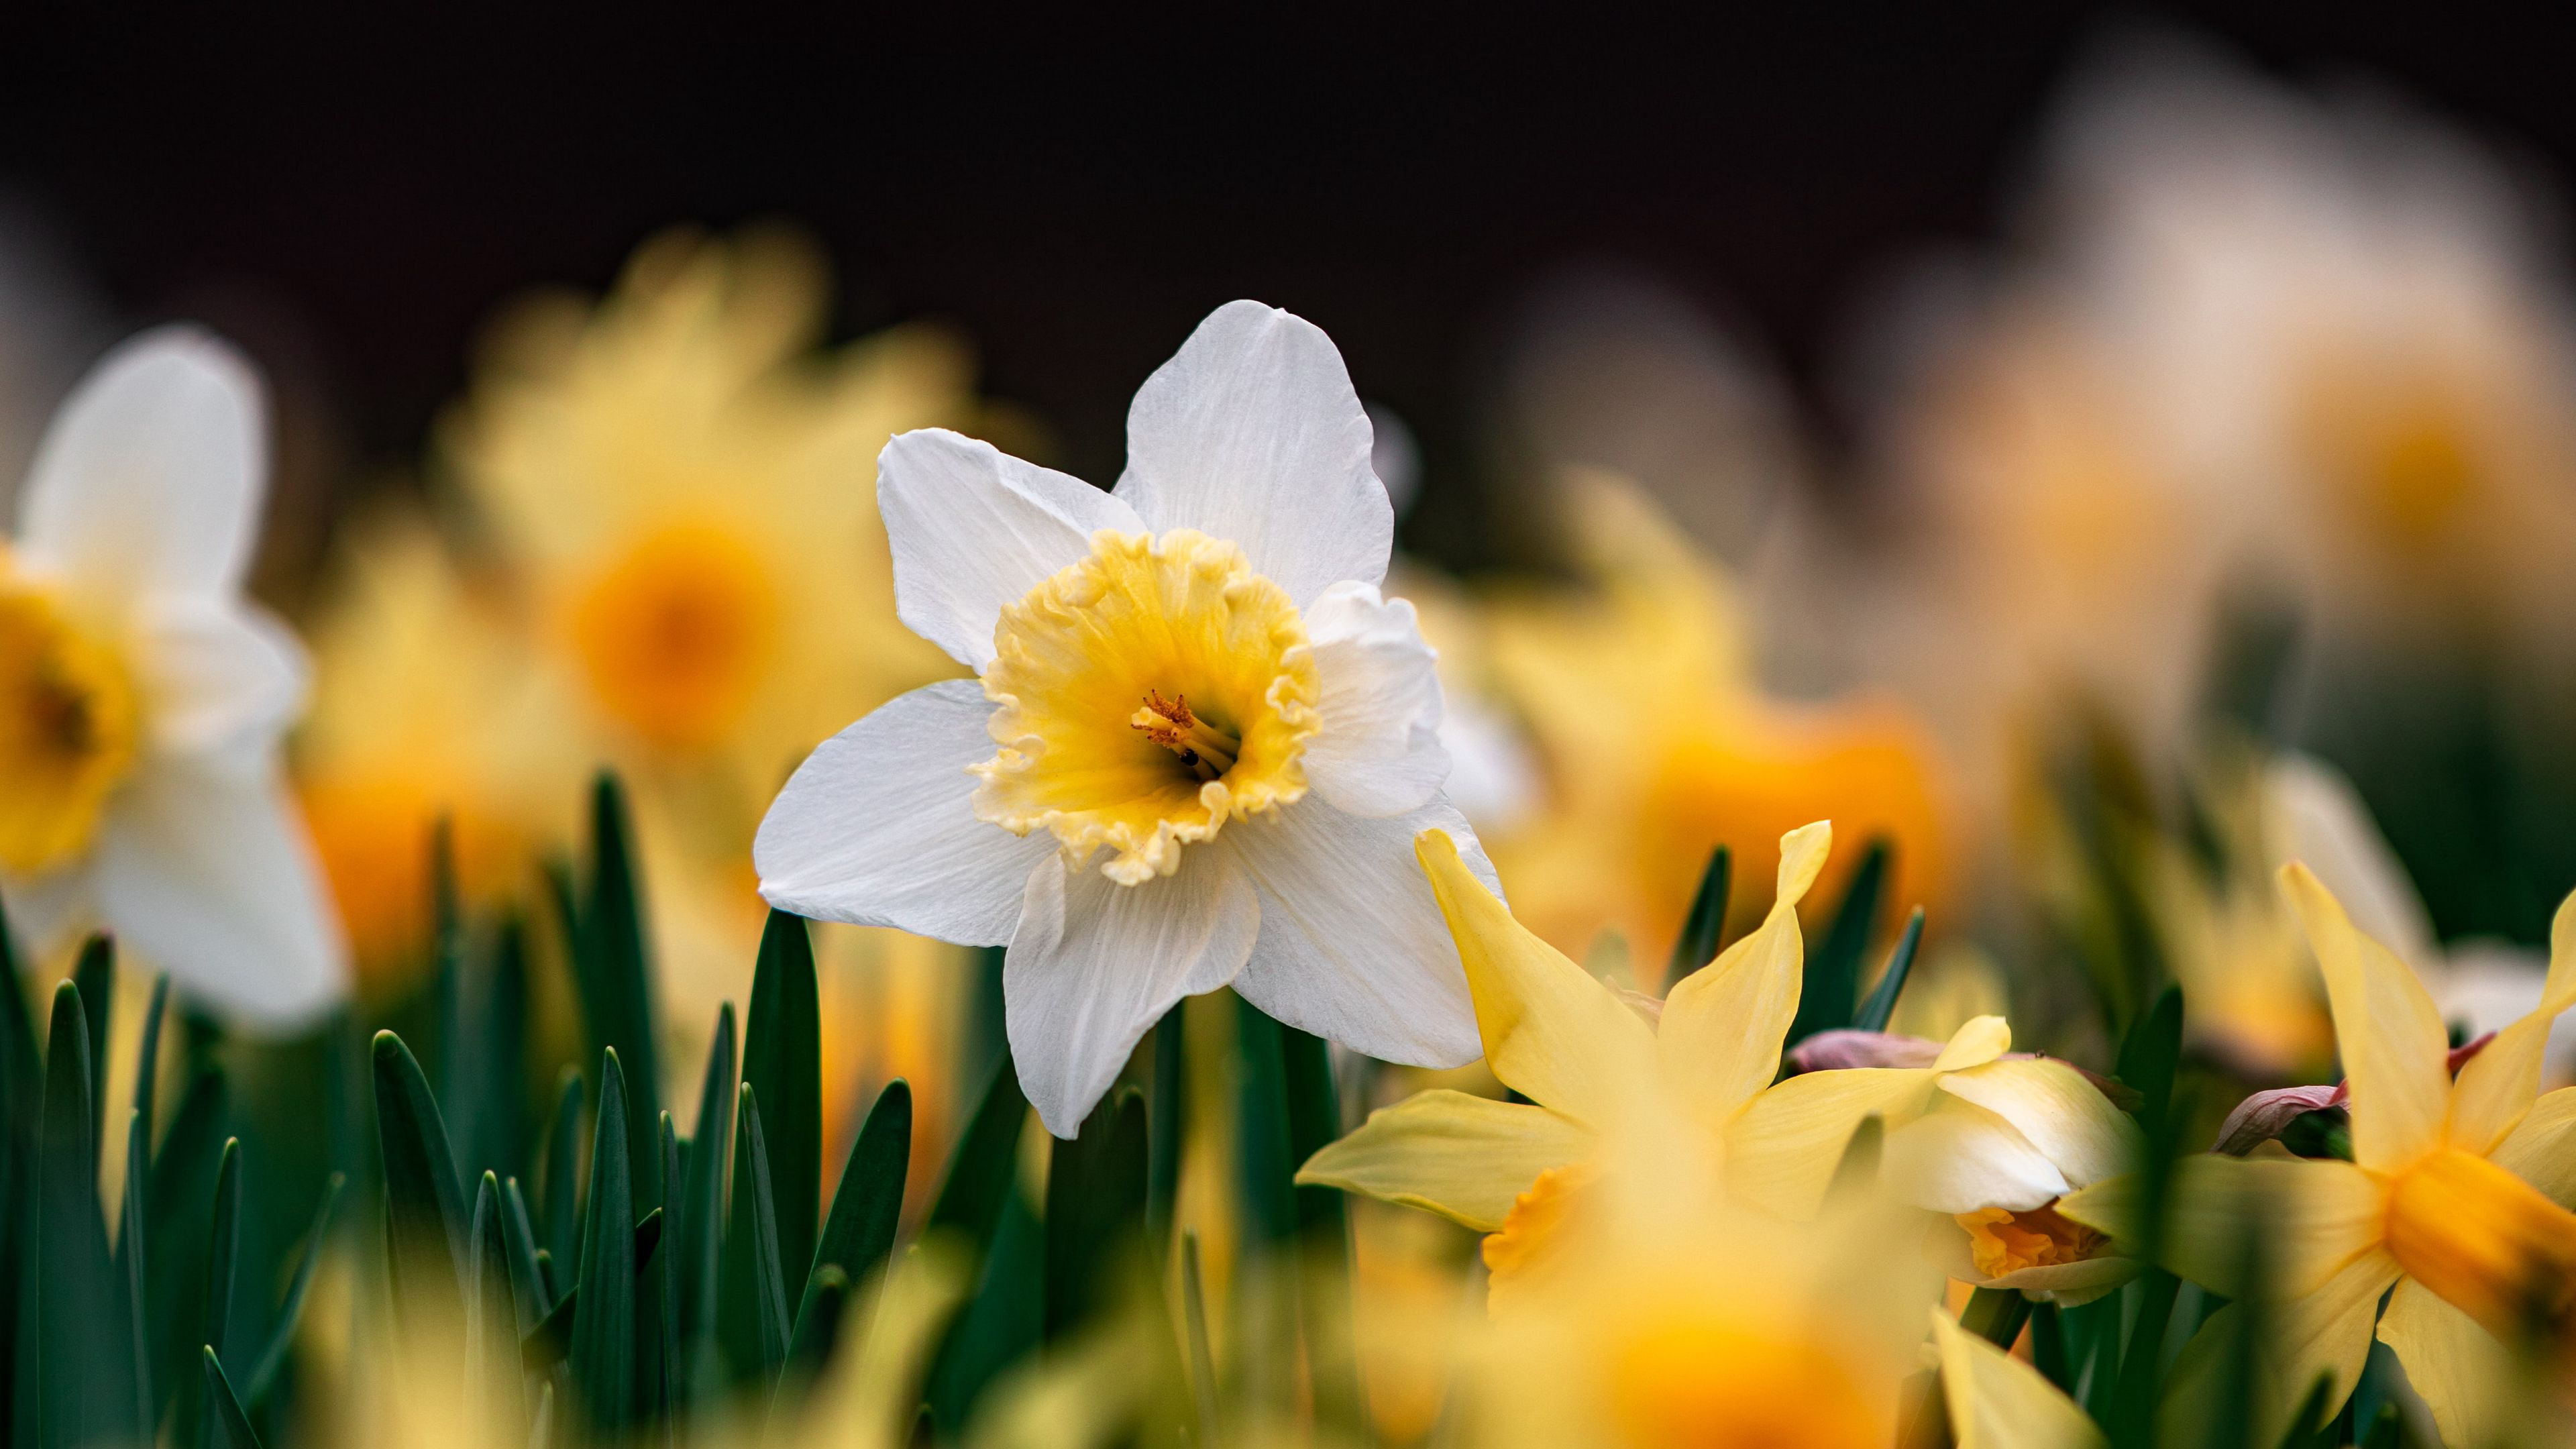 Focusing Photography Of White Yellow Daffodils K HD